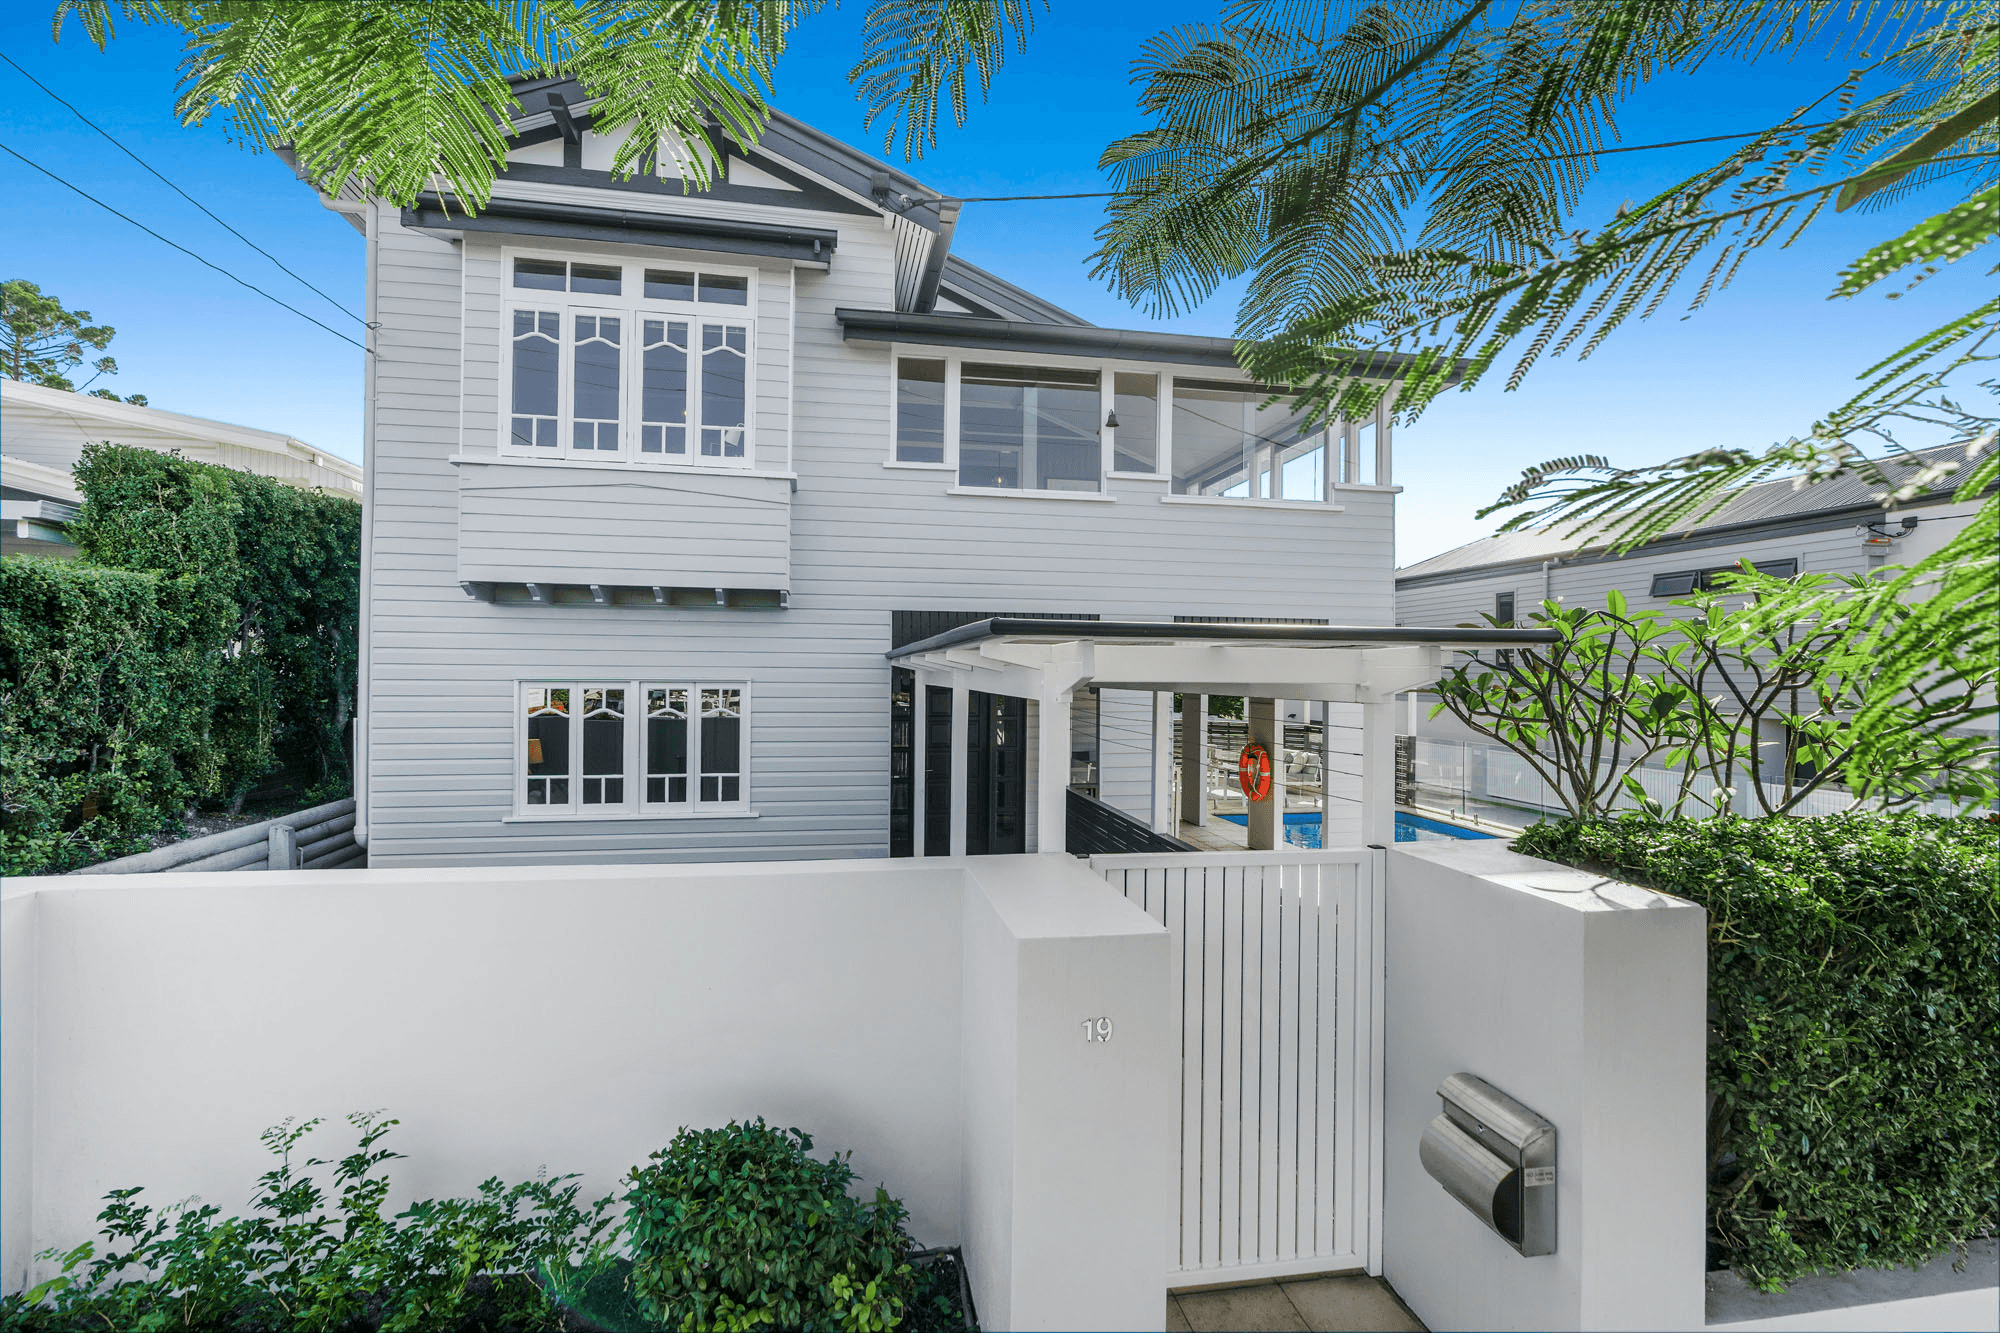 19 Arnold Street, Manly, QLD 4179